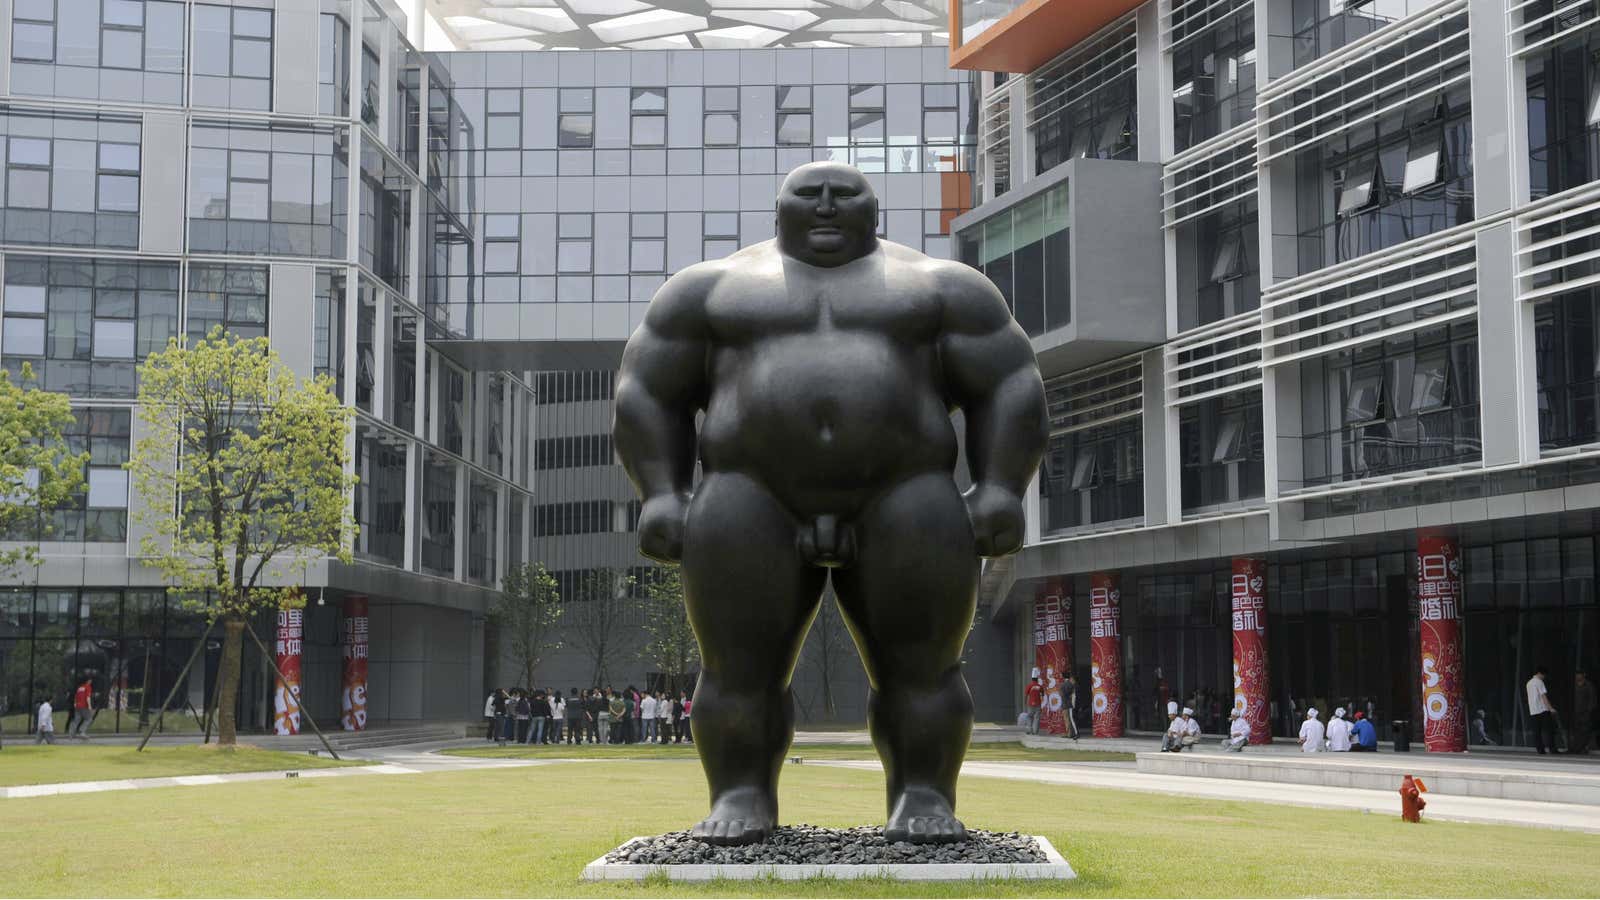 Like this statue at its headquarters, Alibaba is giant.